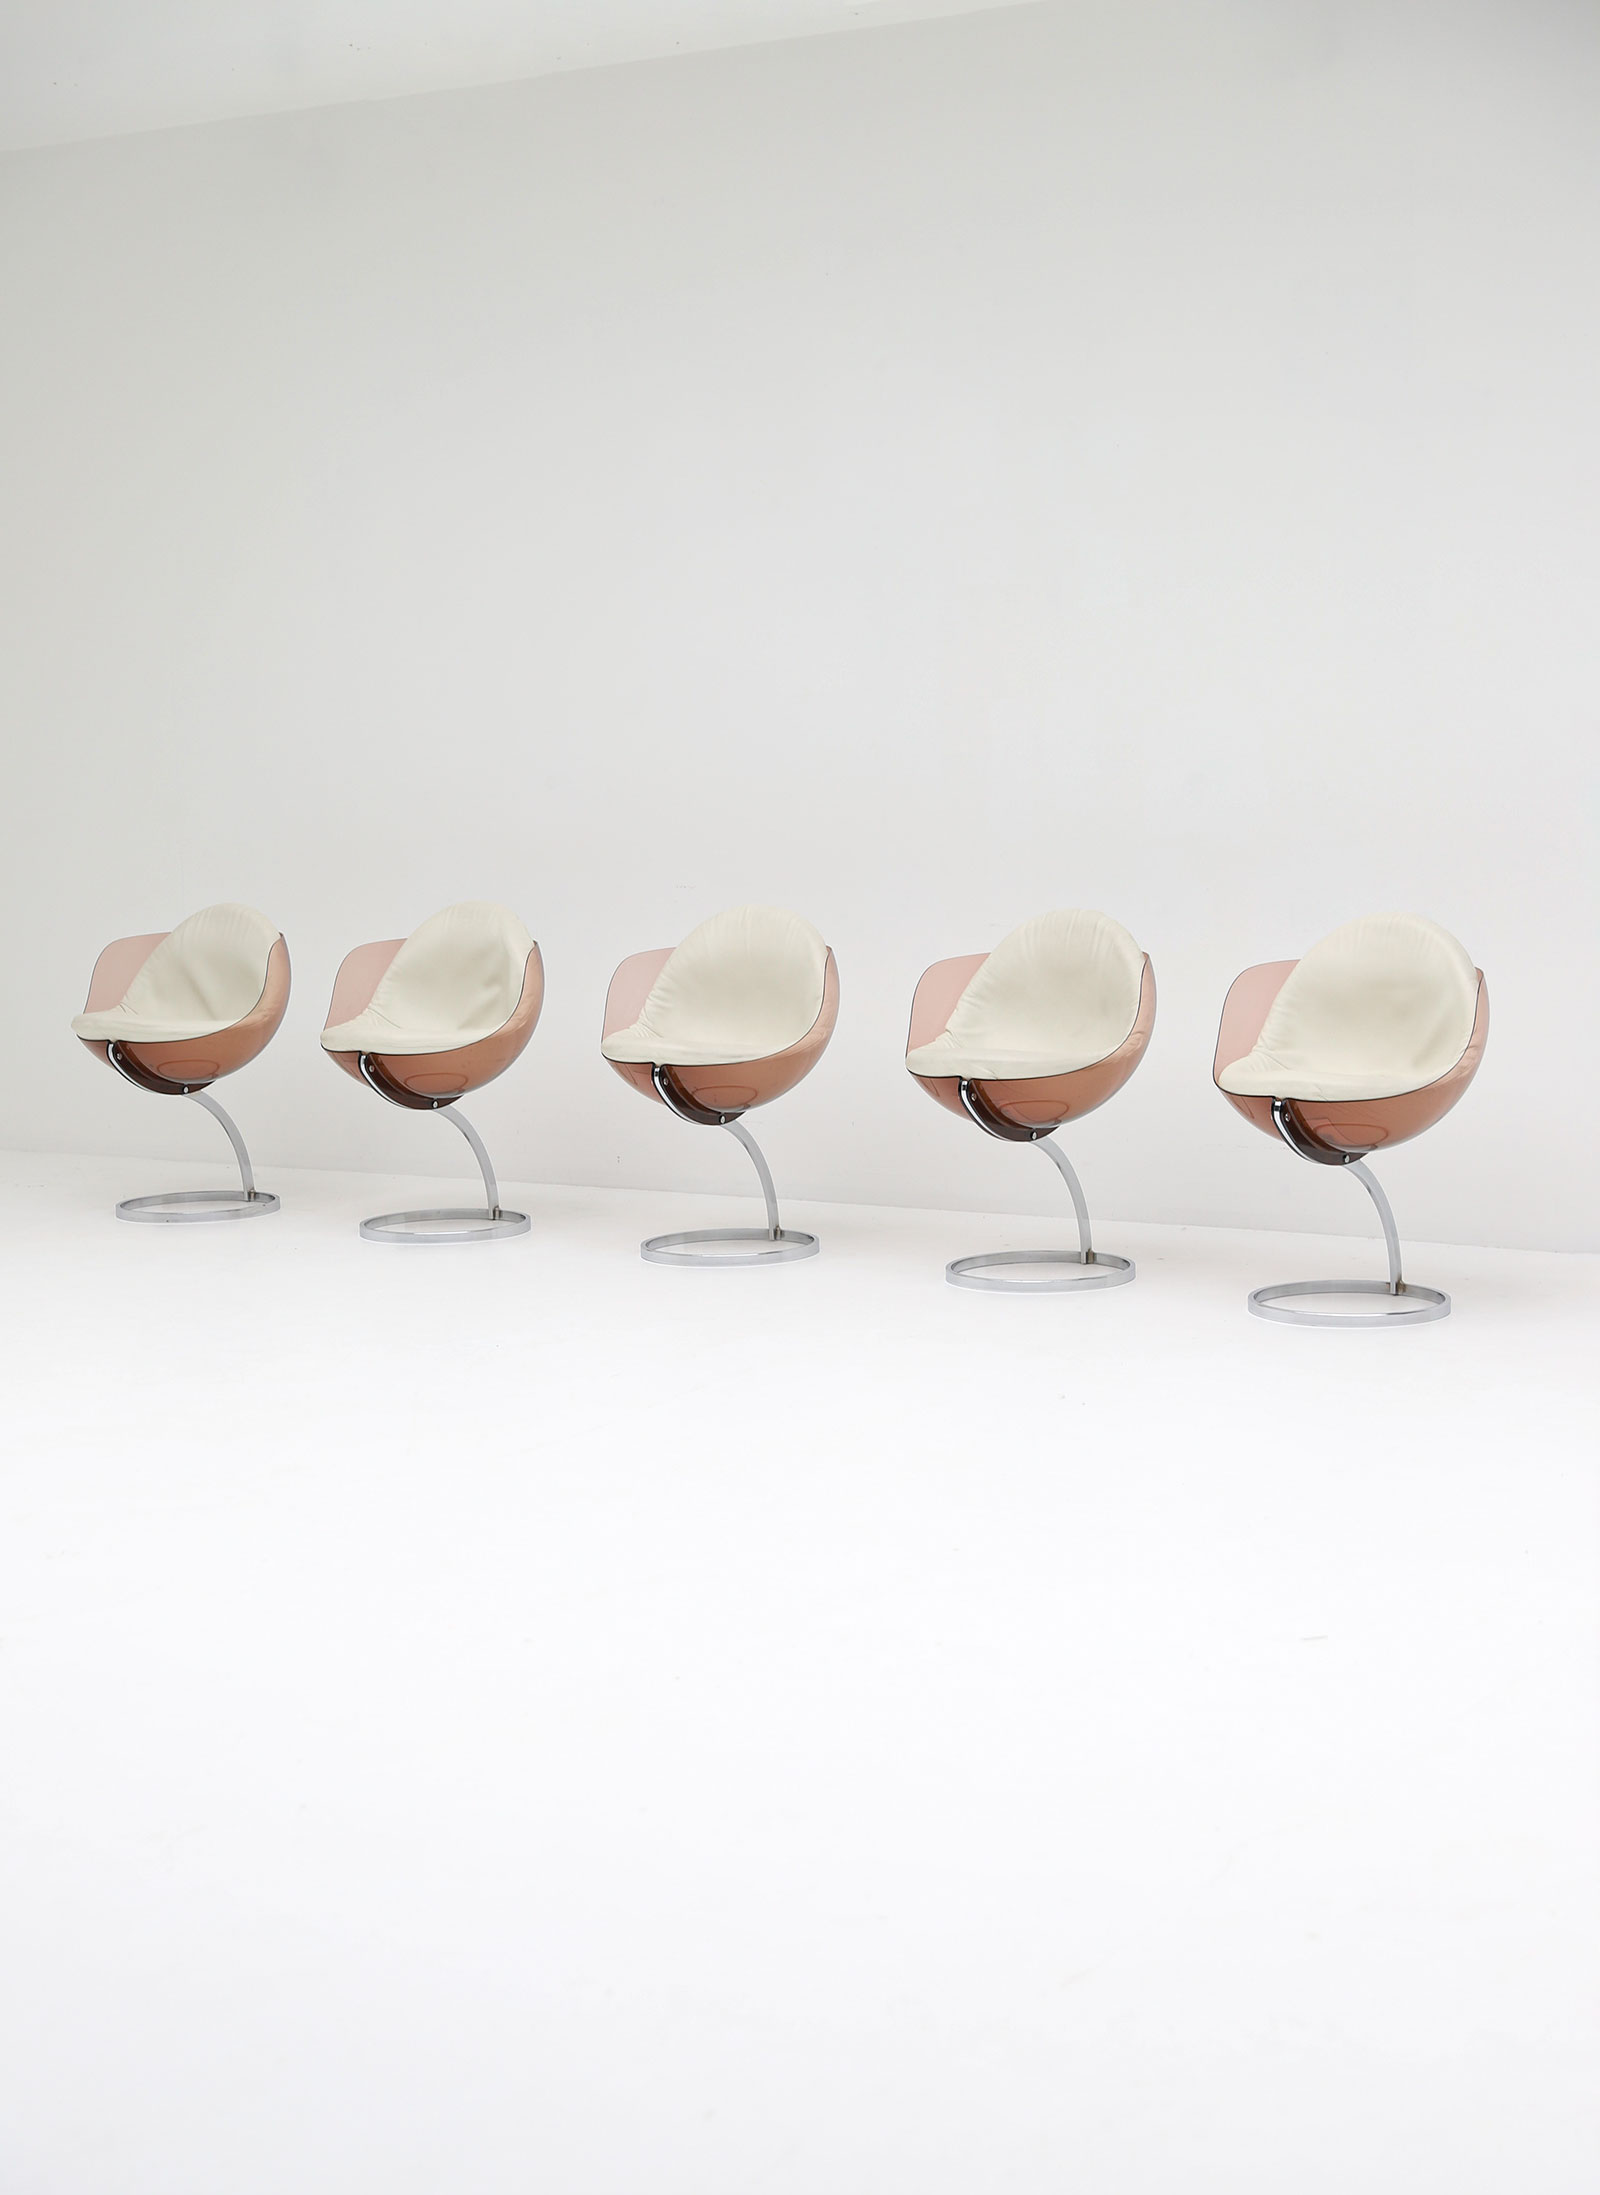 Sphere chair designed by Boris Tabacoffimage 2